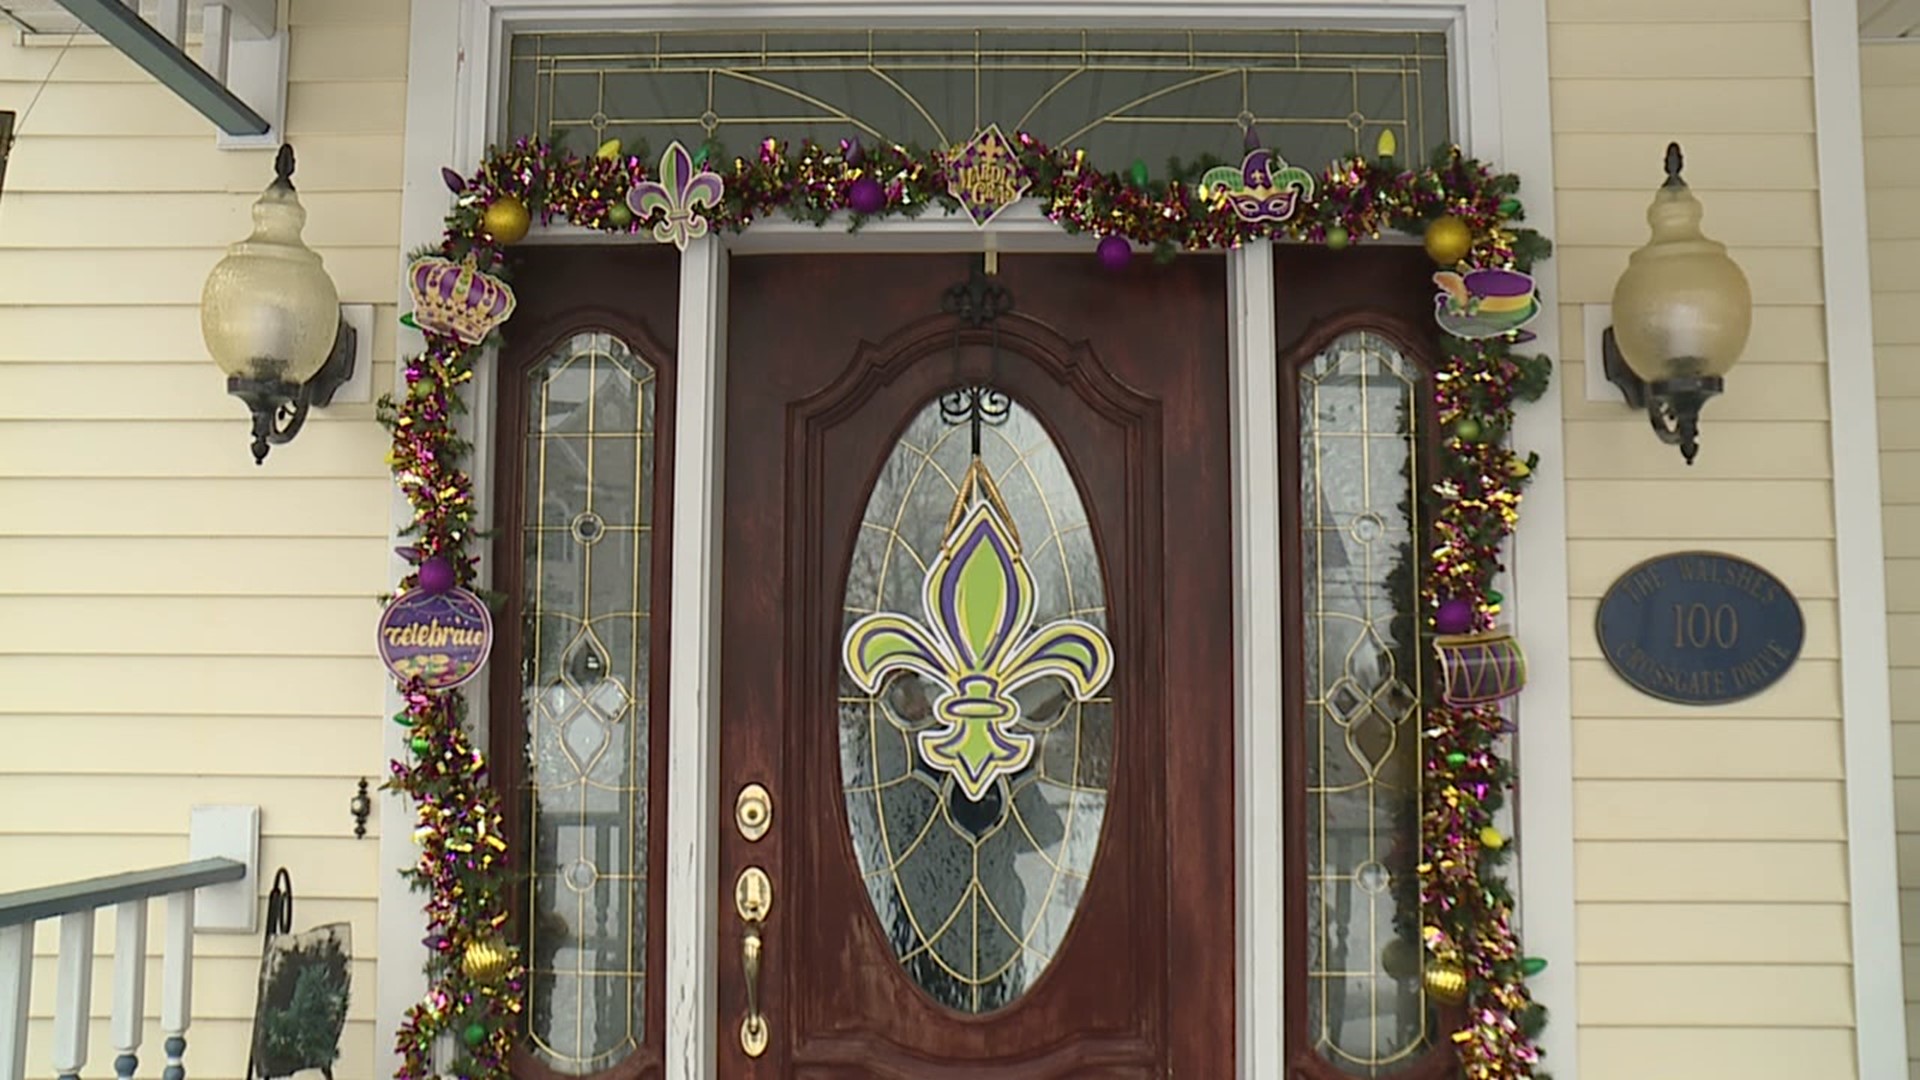 New Orleans came up with a socially distant way to celebrate Mardi Gras, and that effort spread as far as South Abington Township.